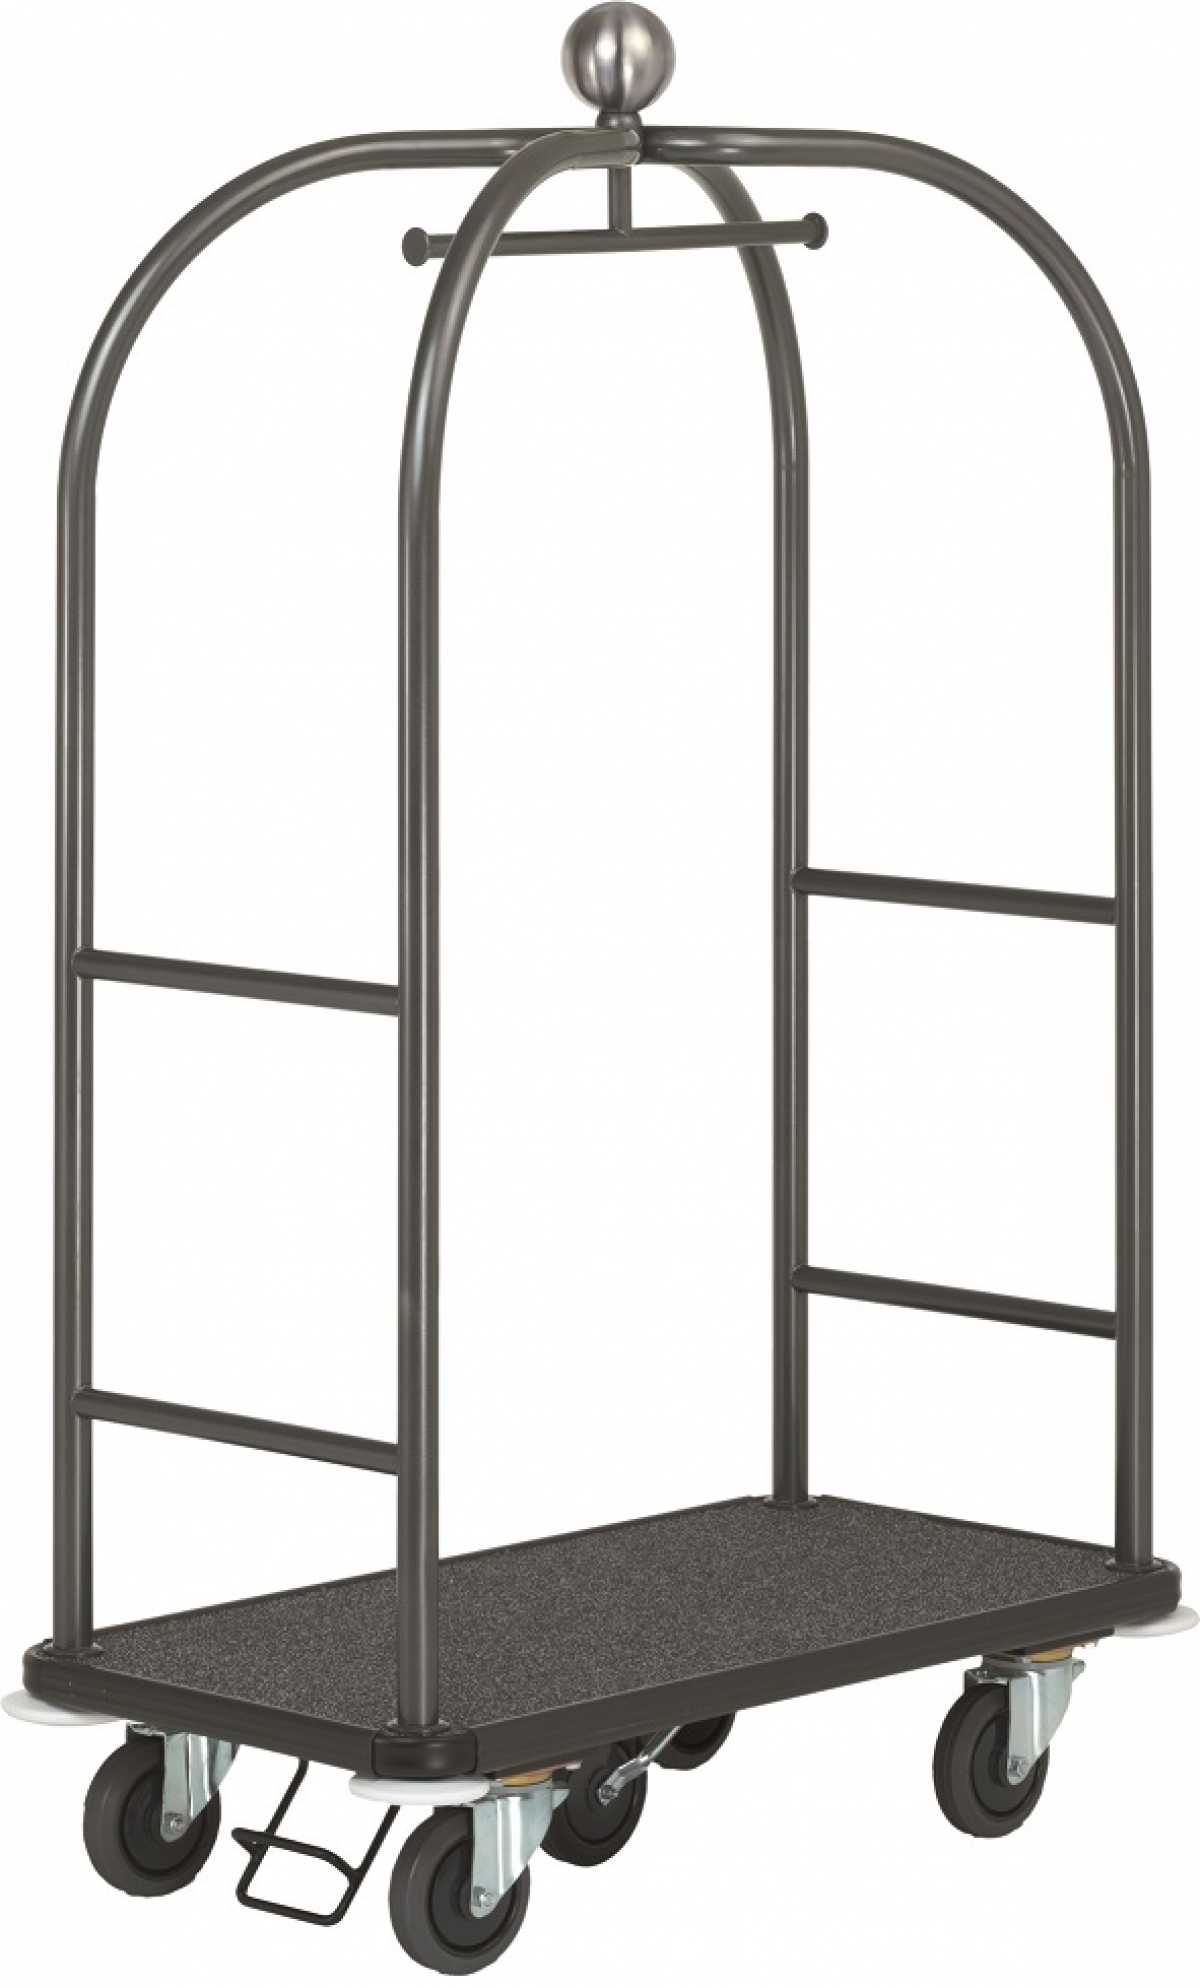 WANZL Luggage Collection Trolley GS-Lobby, Black Electro-polished stainless steel